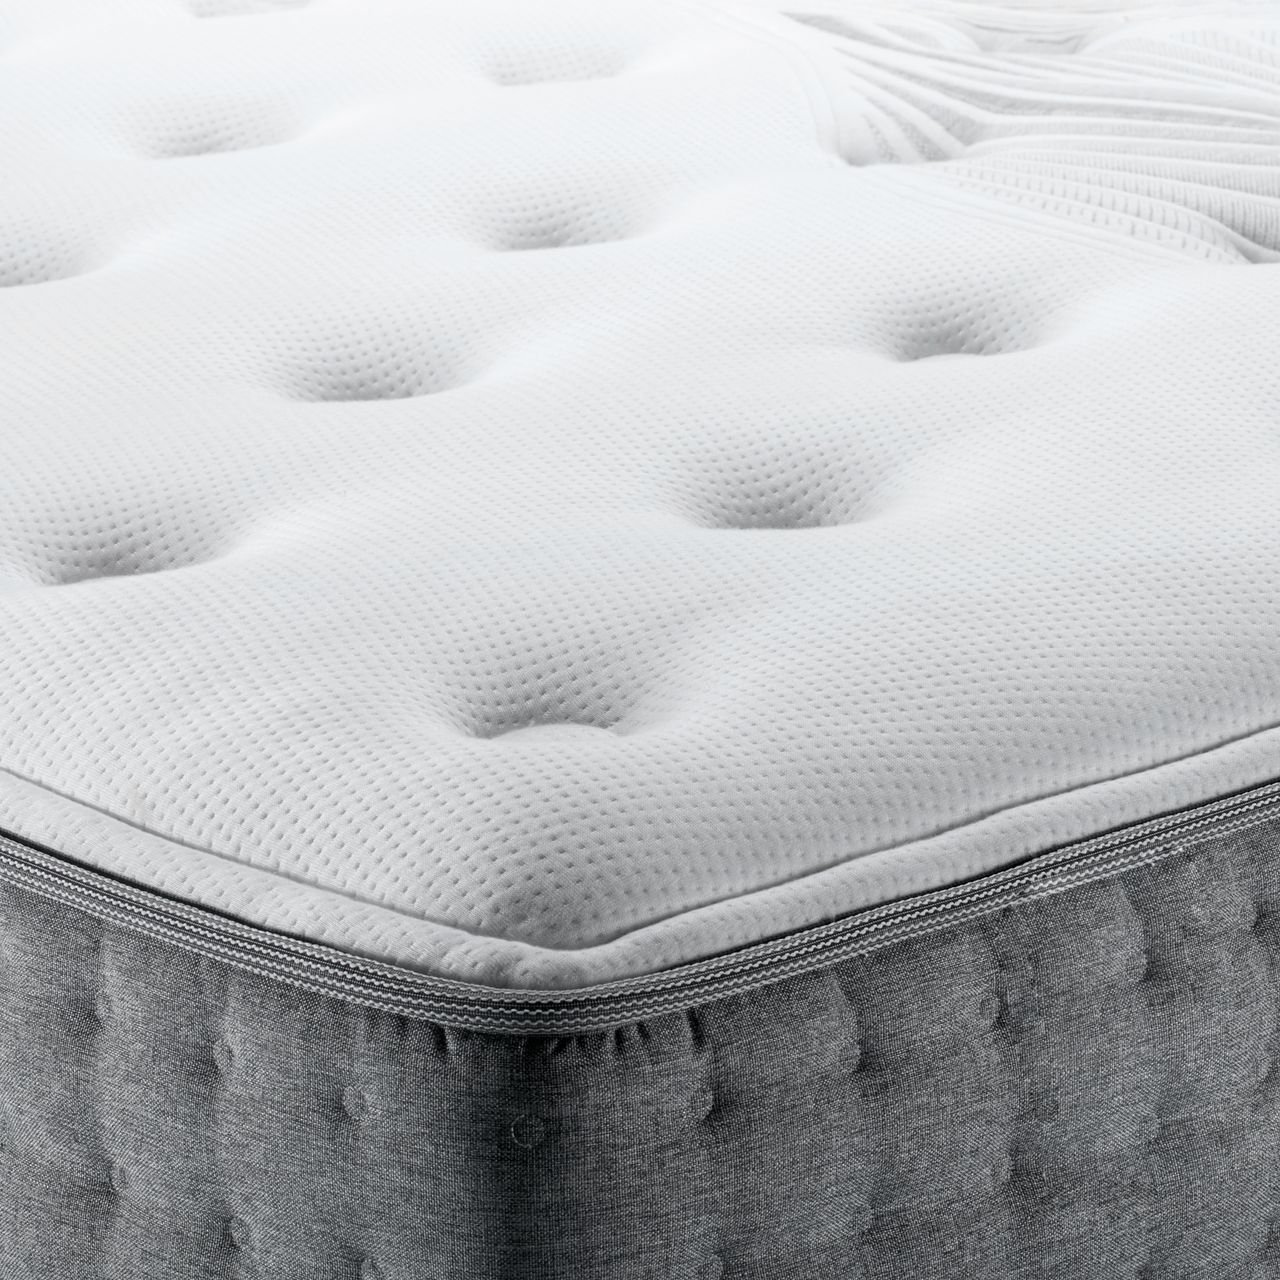 InnerSpring Mattresses for sale: Classic Rest Collection at Spokane, WA mattress store